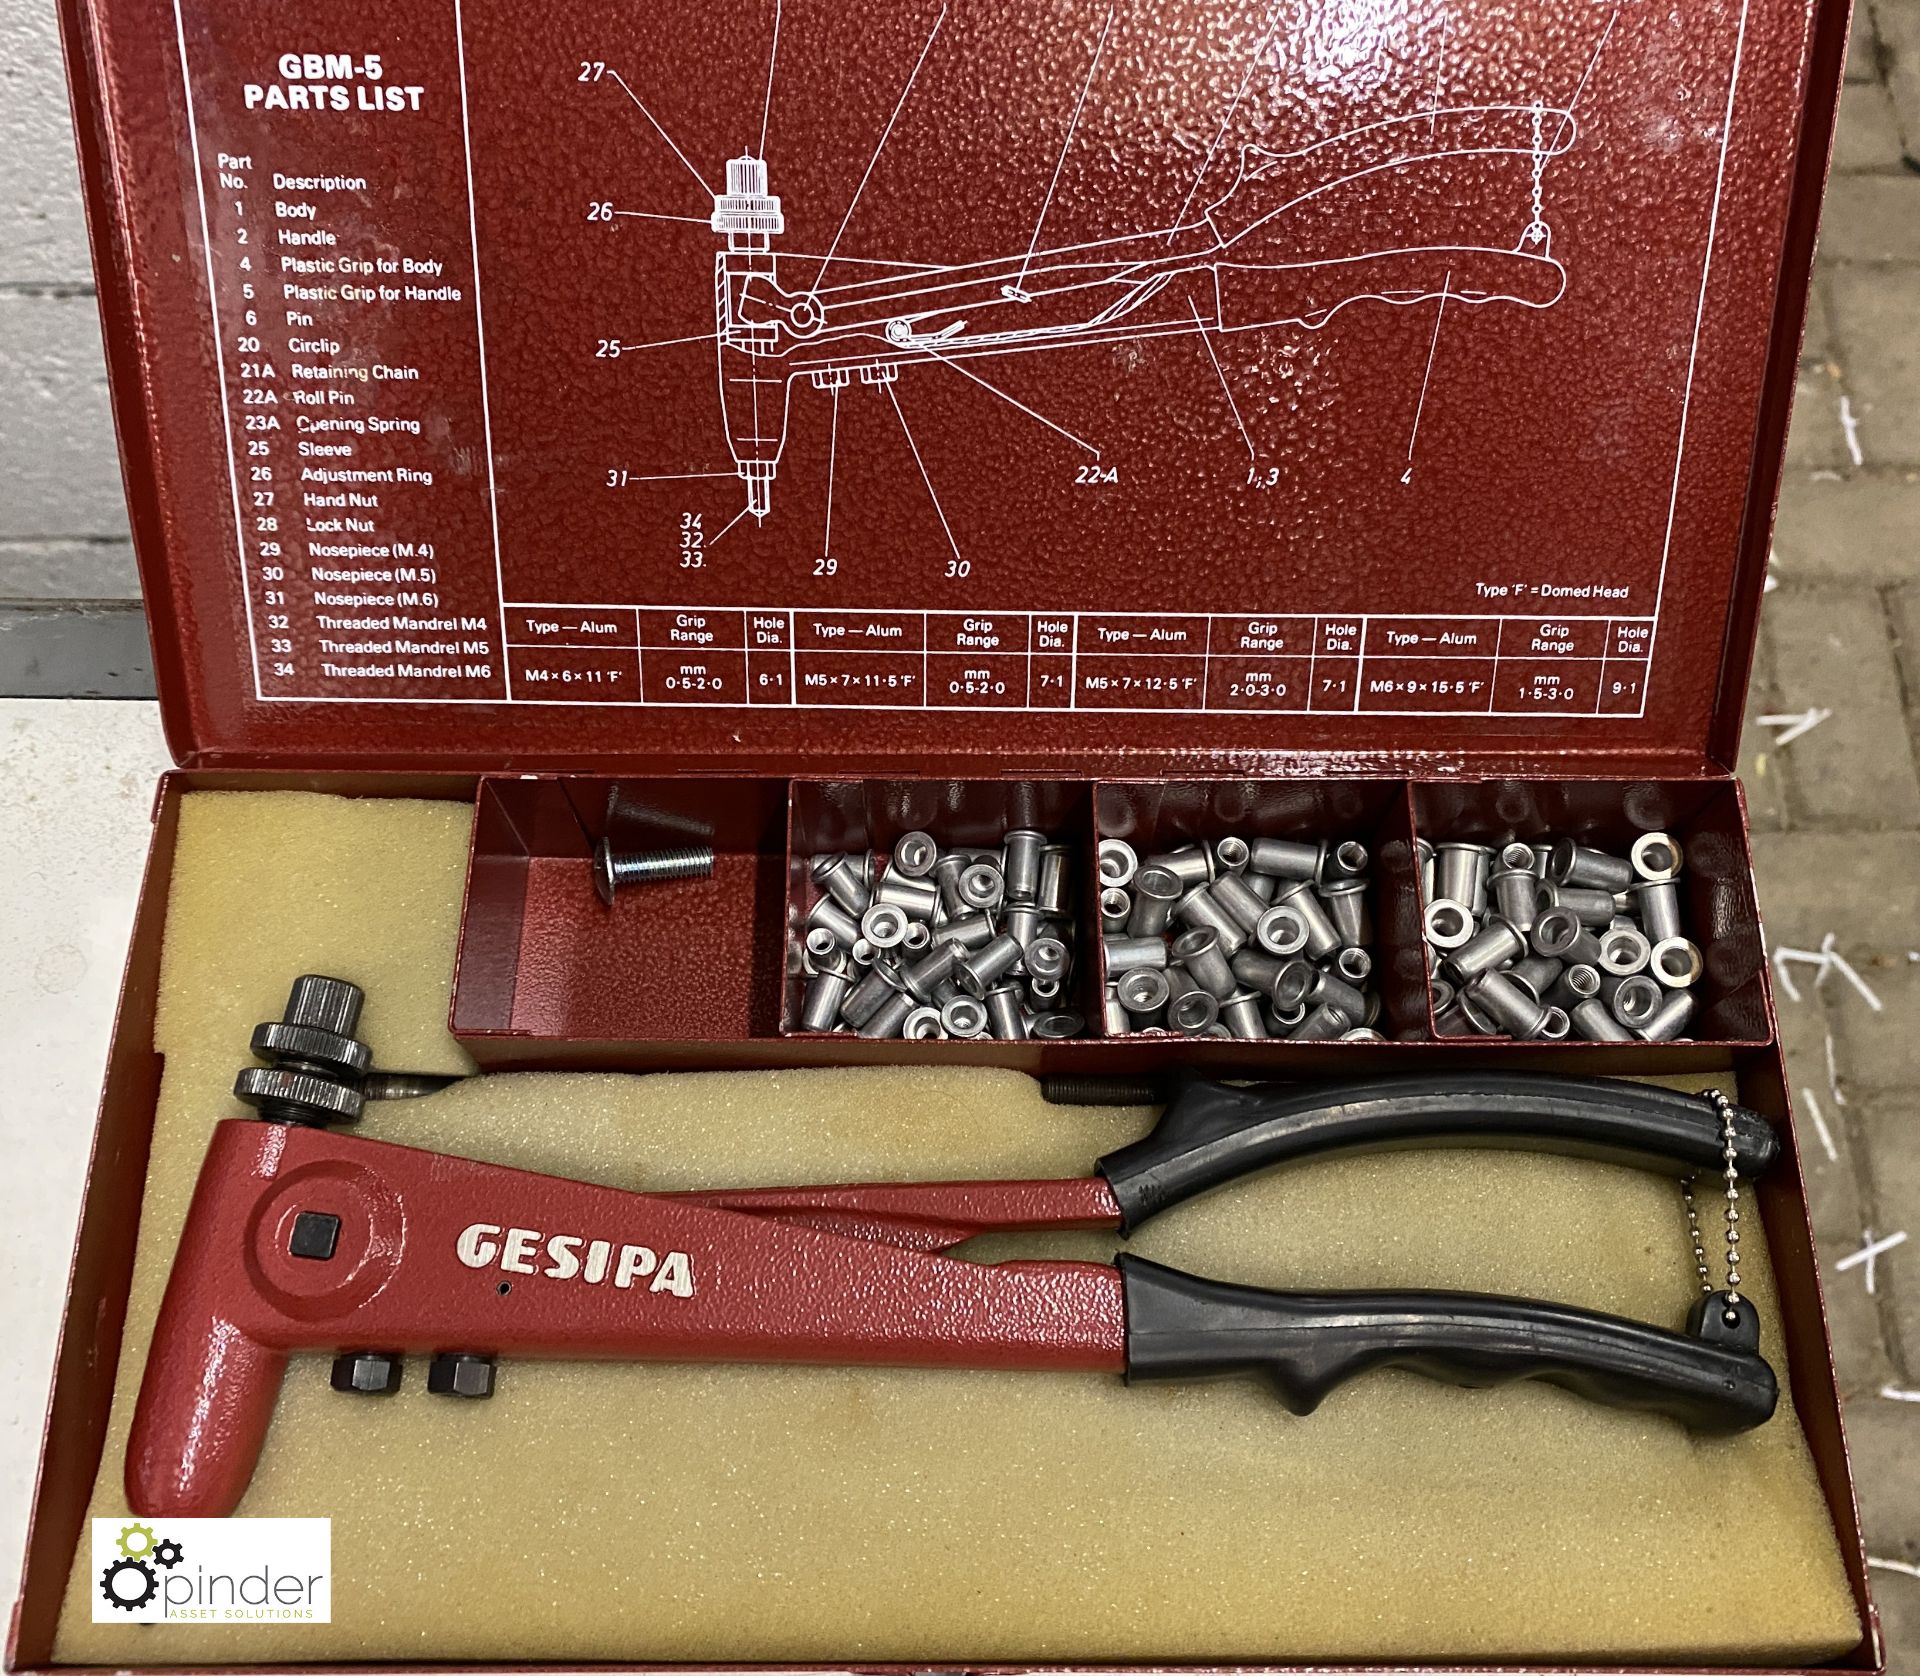 Gesipa GBM-5 Rivet Nut Kit, with case (located in Maintenance Workshop 1)